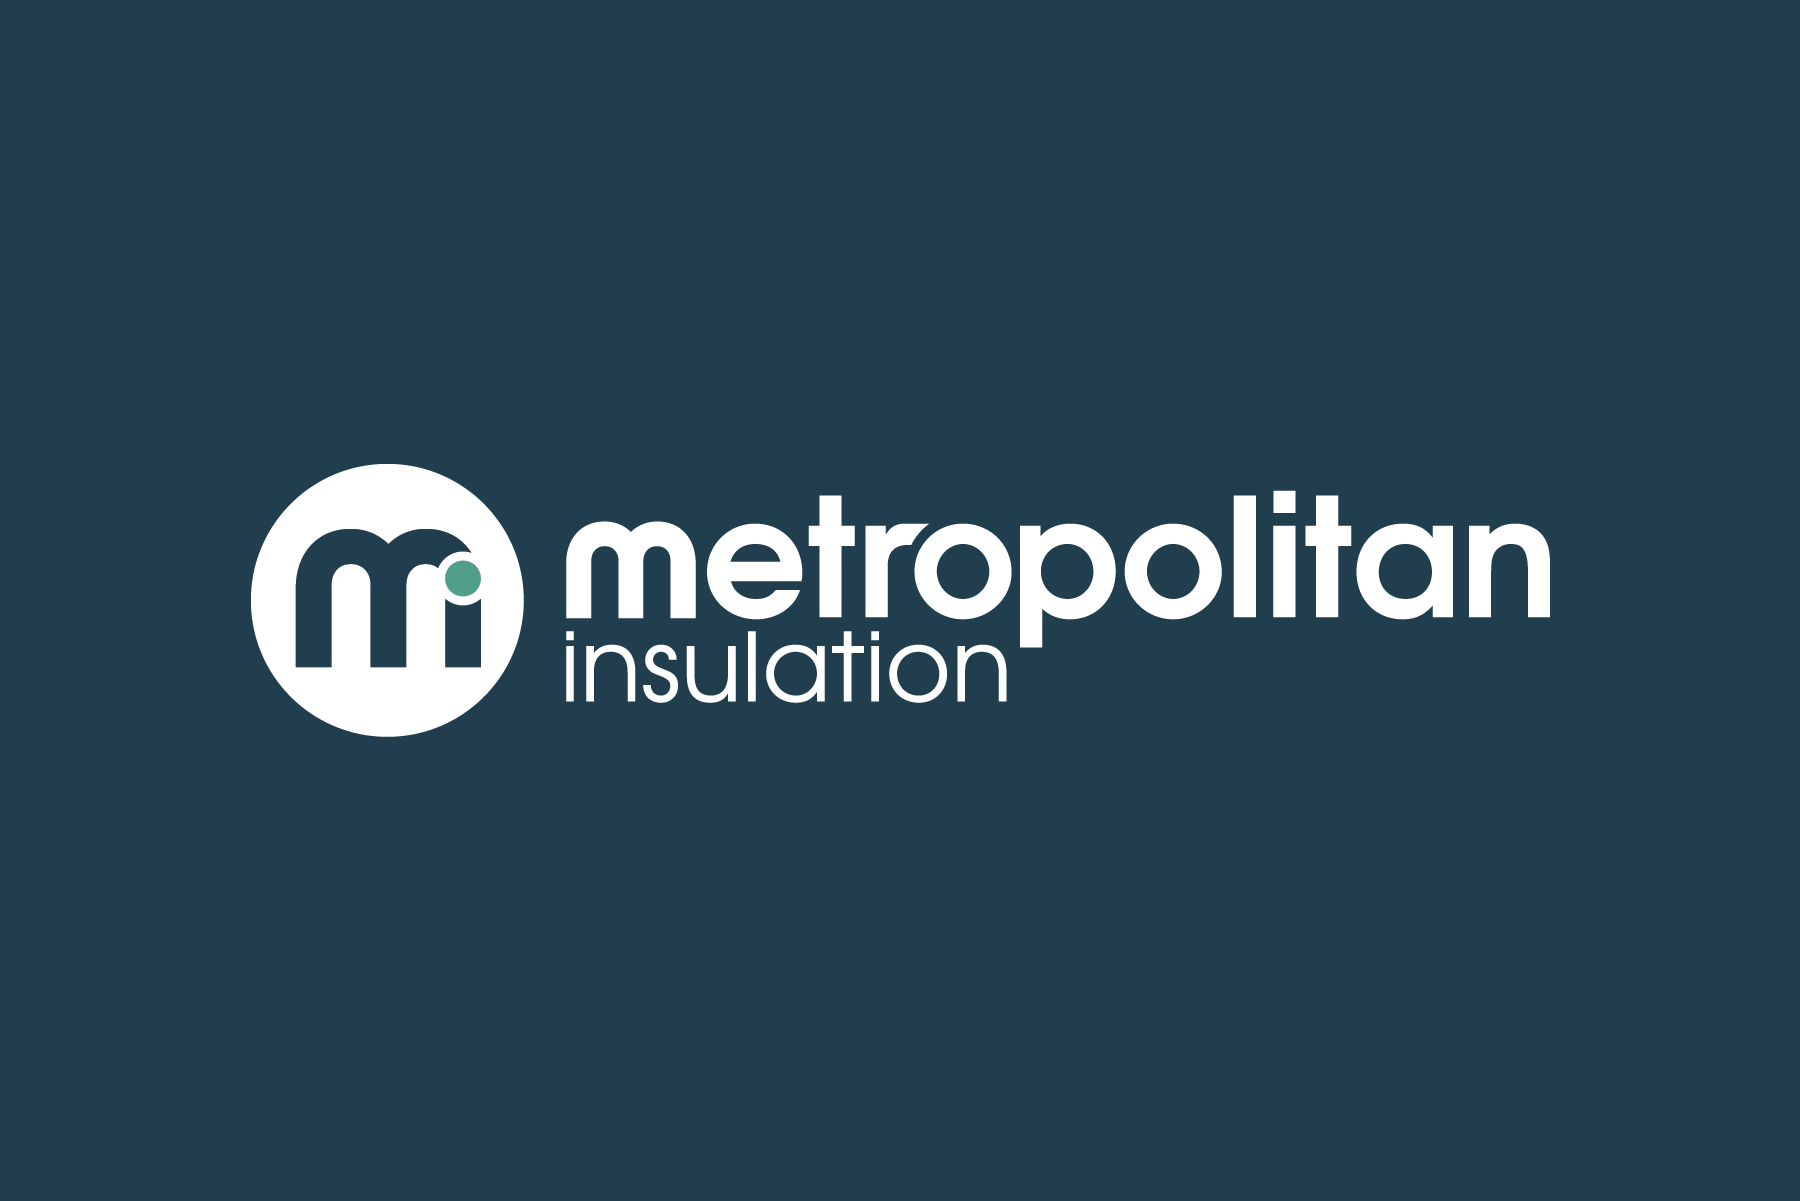 Why Choose Metropolitan Insulation for Your Soundproofing Needs?